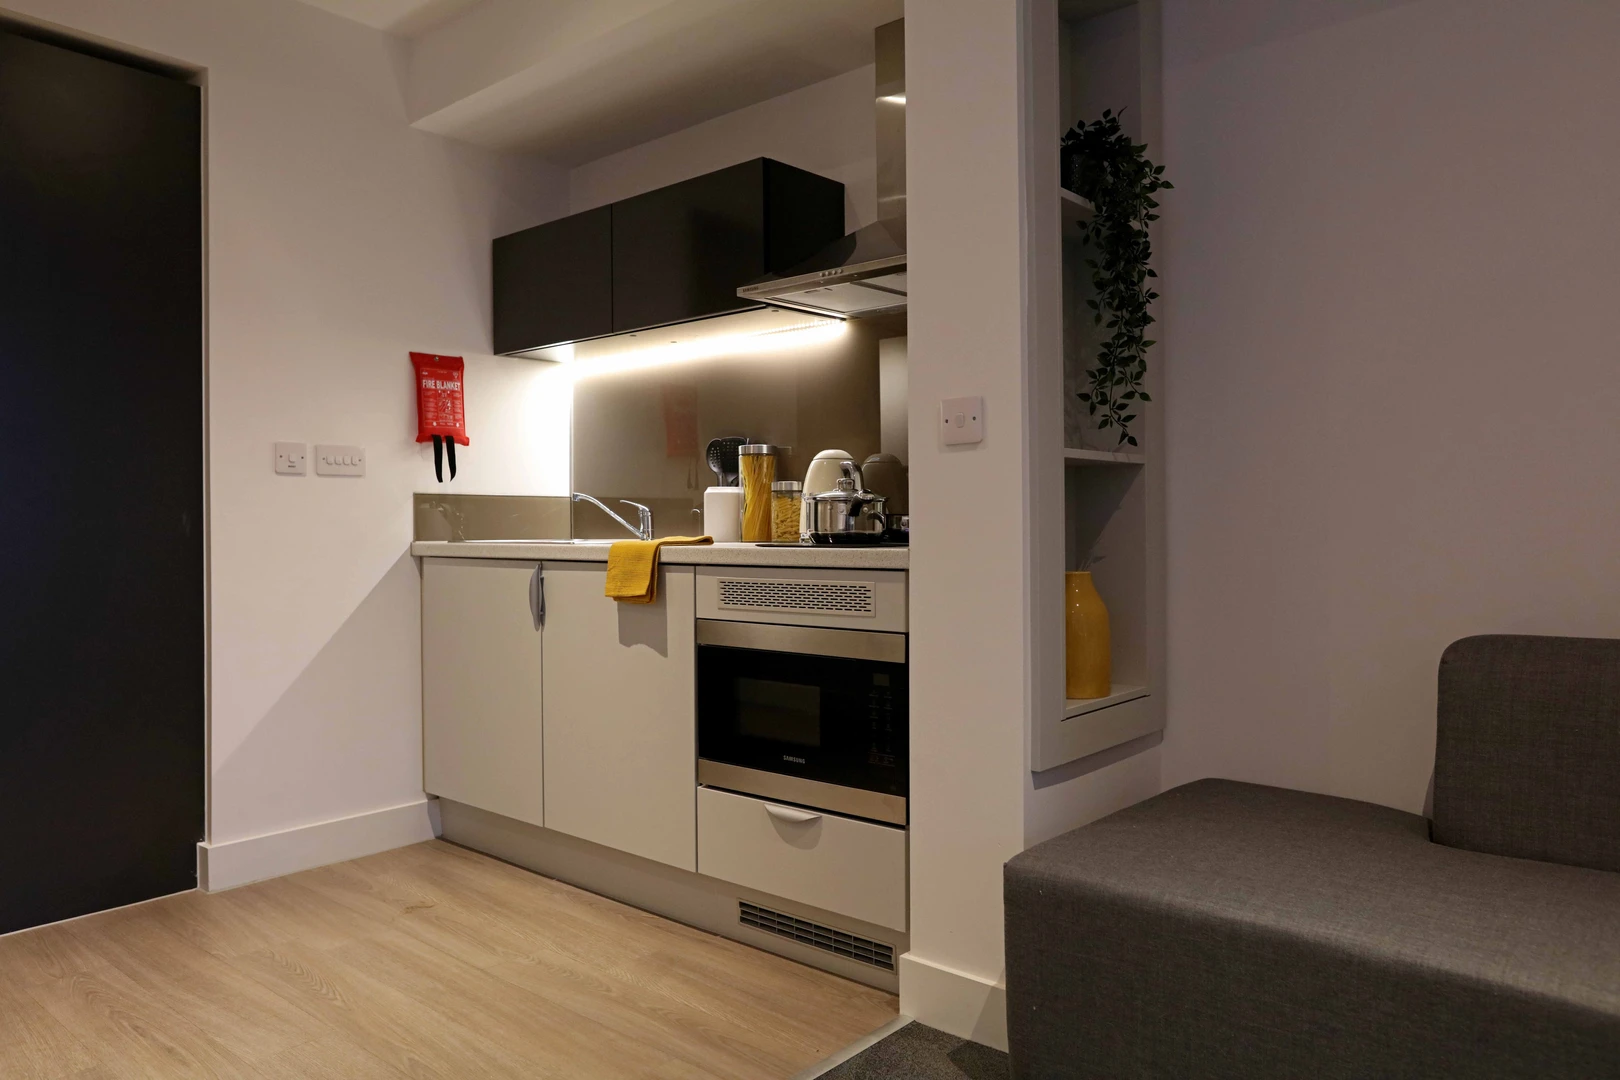 Renting rooms by the month in Salford